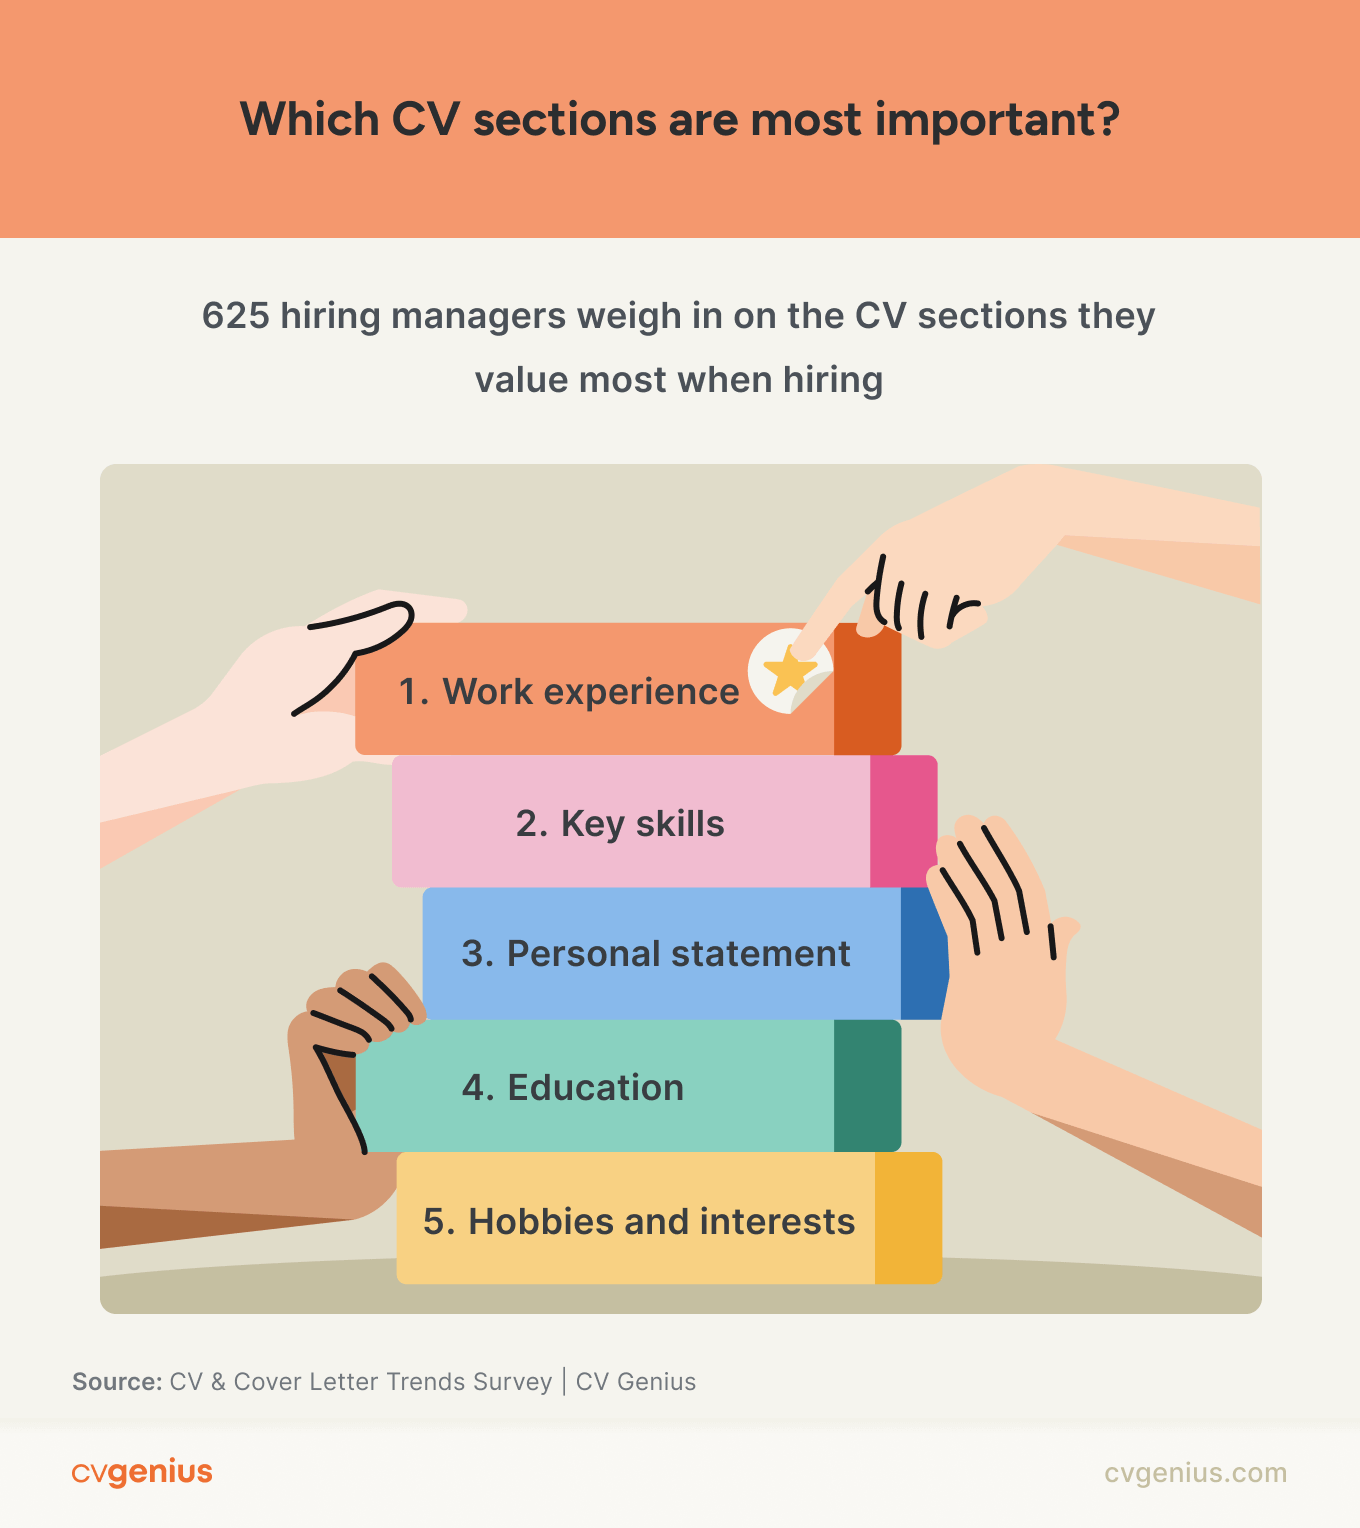 An infographic showing the order of CV sections most valued by employers, with work experience coming in first, then key skills, then personal statement, education, and hobbies and interests last